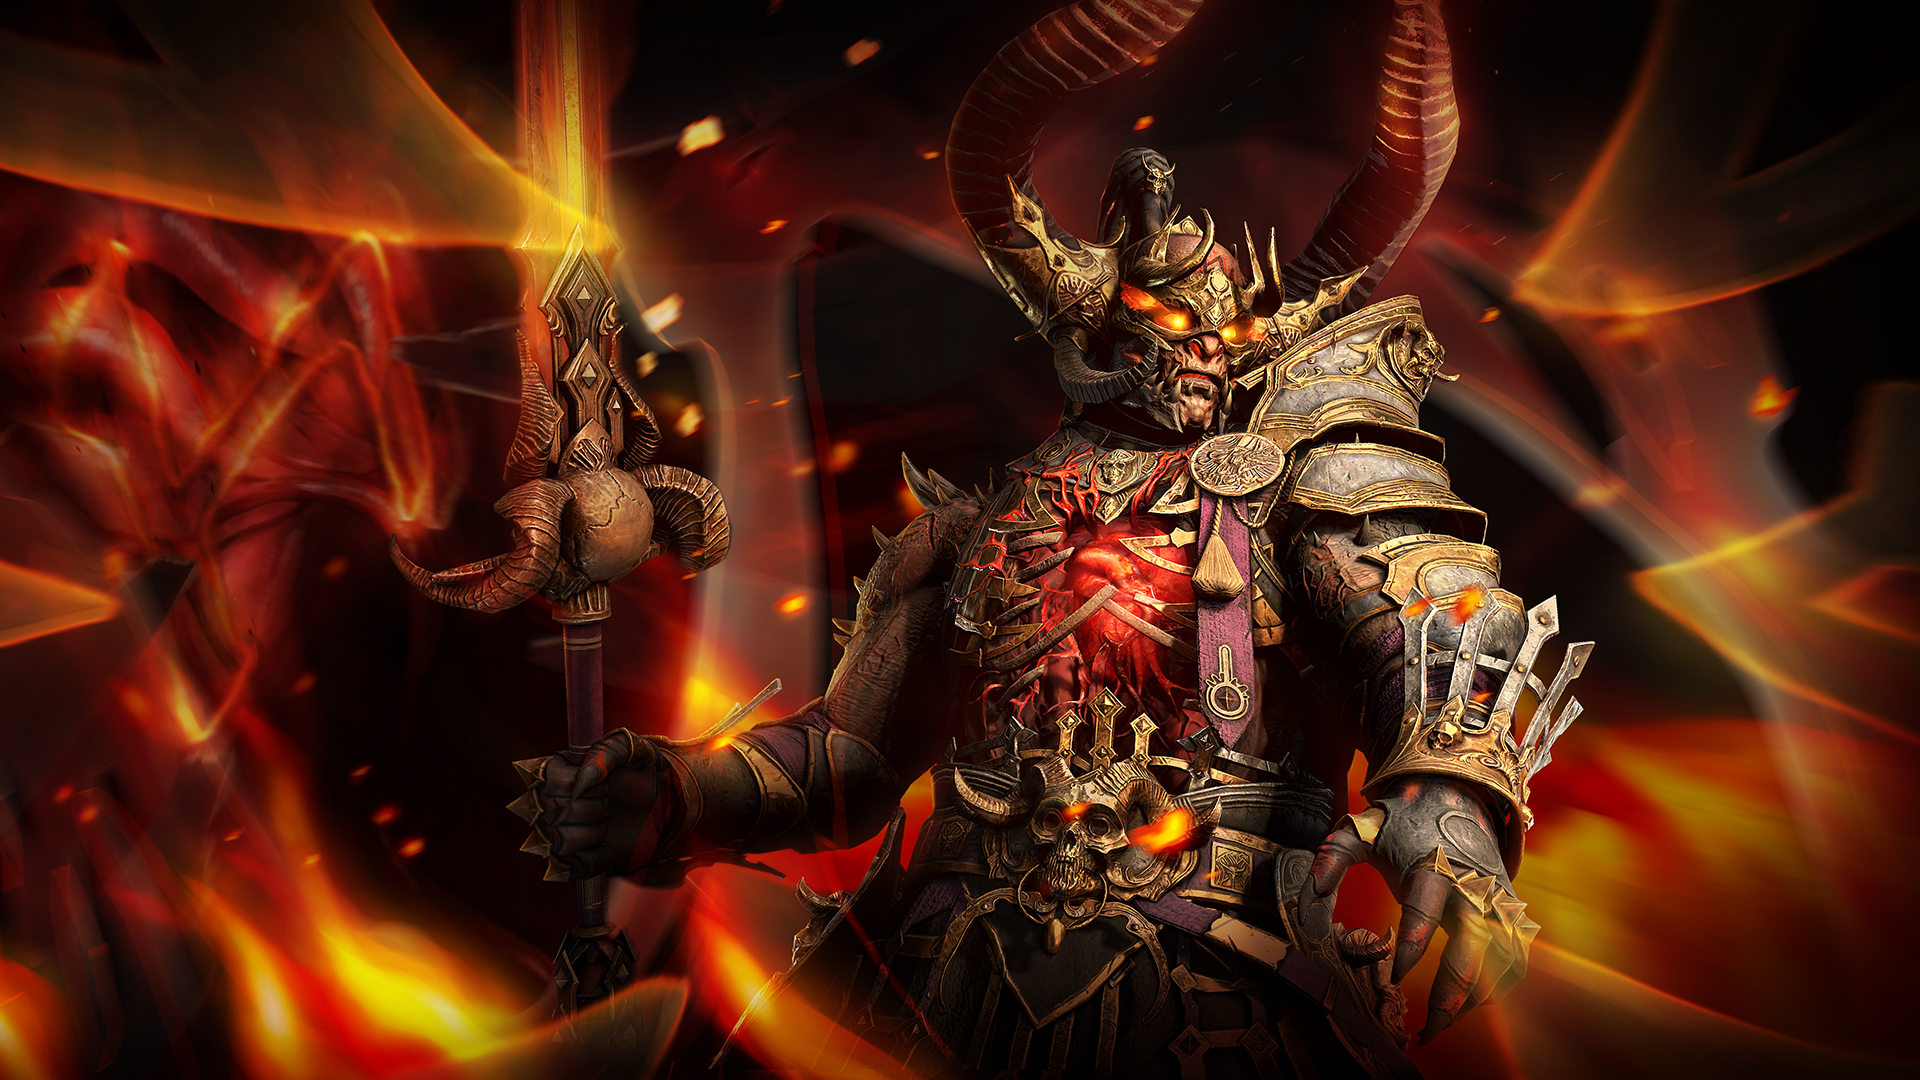 Blizzard snuck in surprise quality of life changes into Diablo 4's massive list of season 4 patch notes